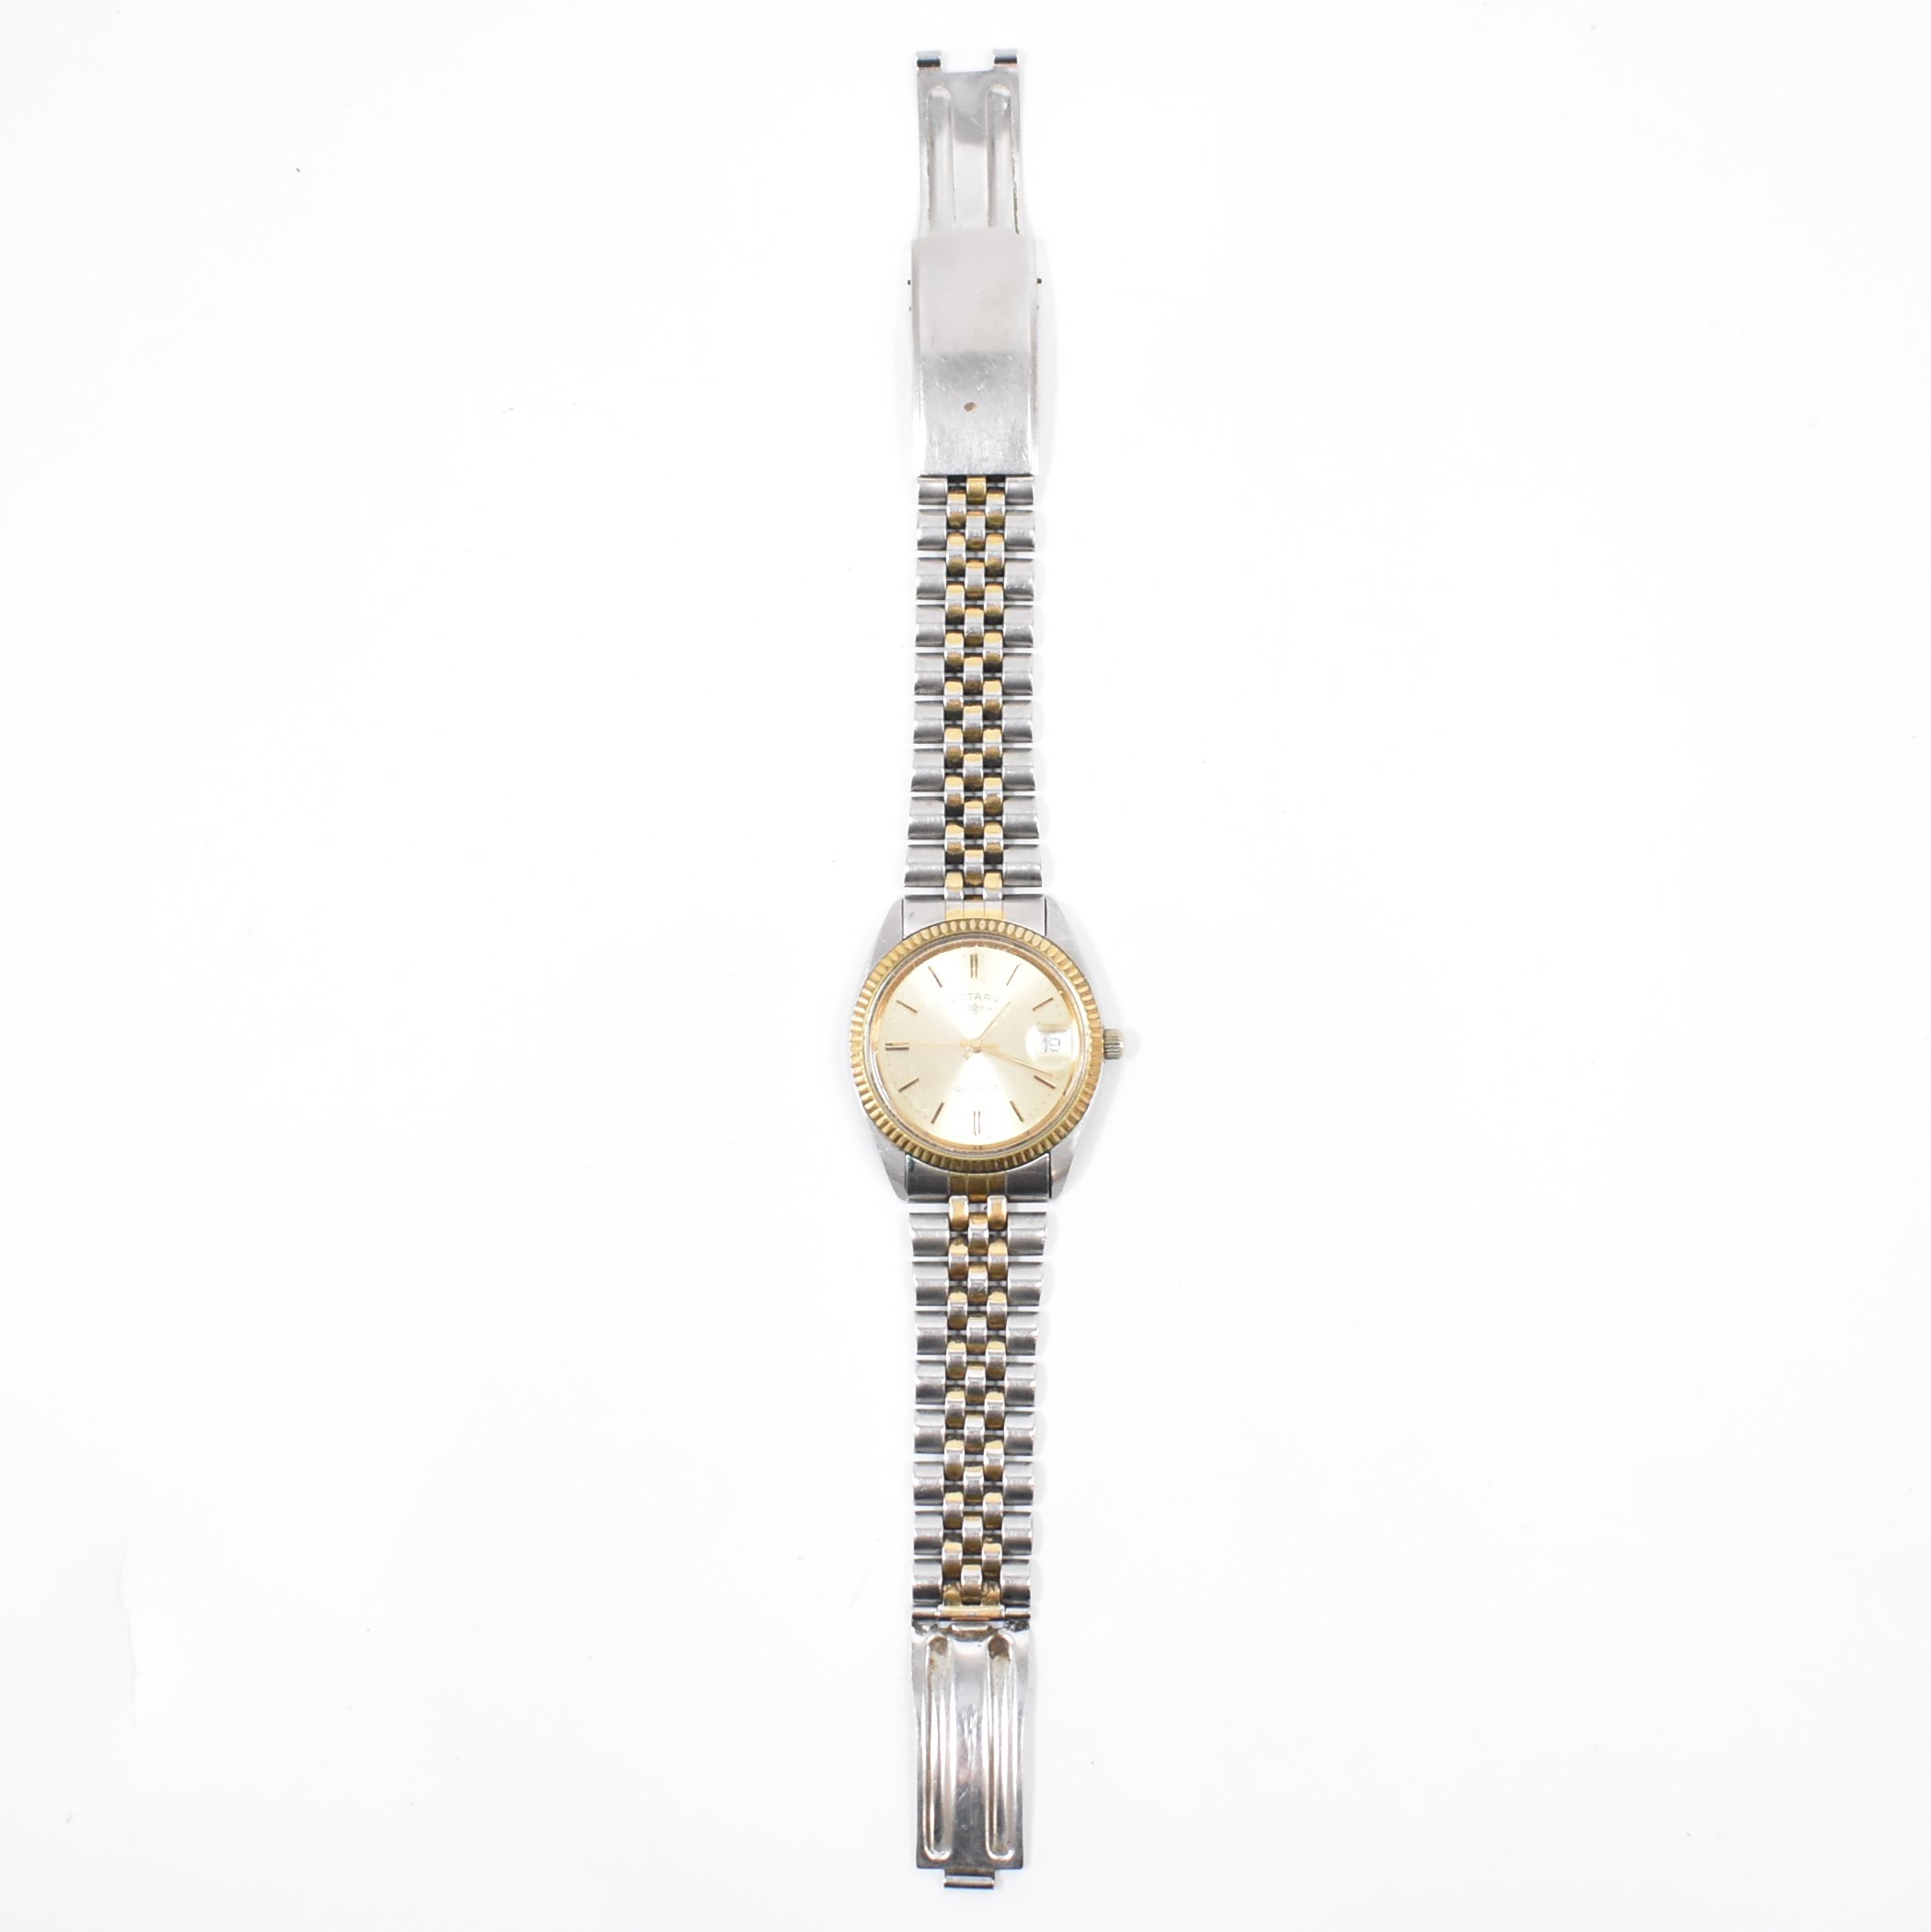 VINTAGE ROTARY QUARTZ WRIST WATCH IN CASE - Image 2 of 5